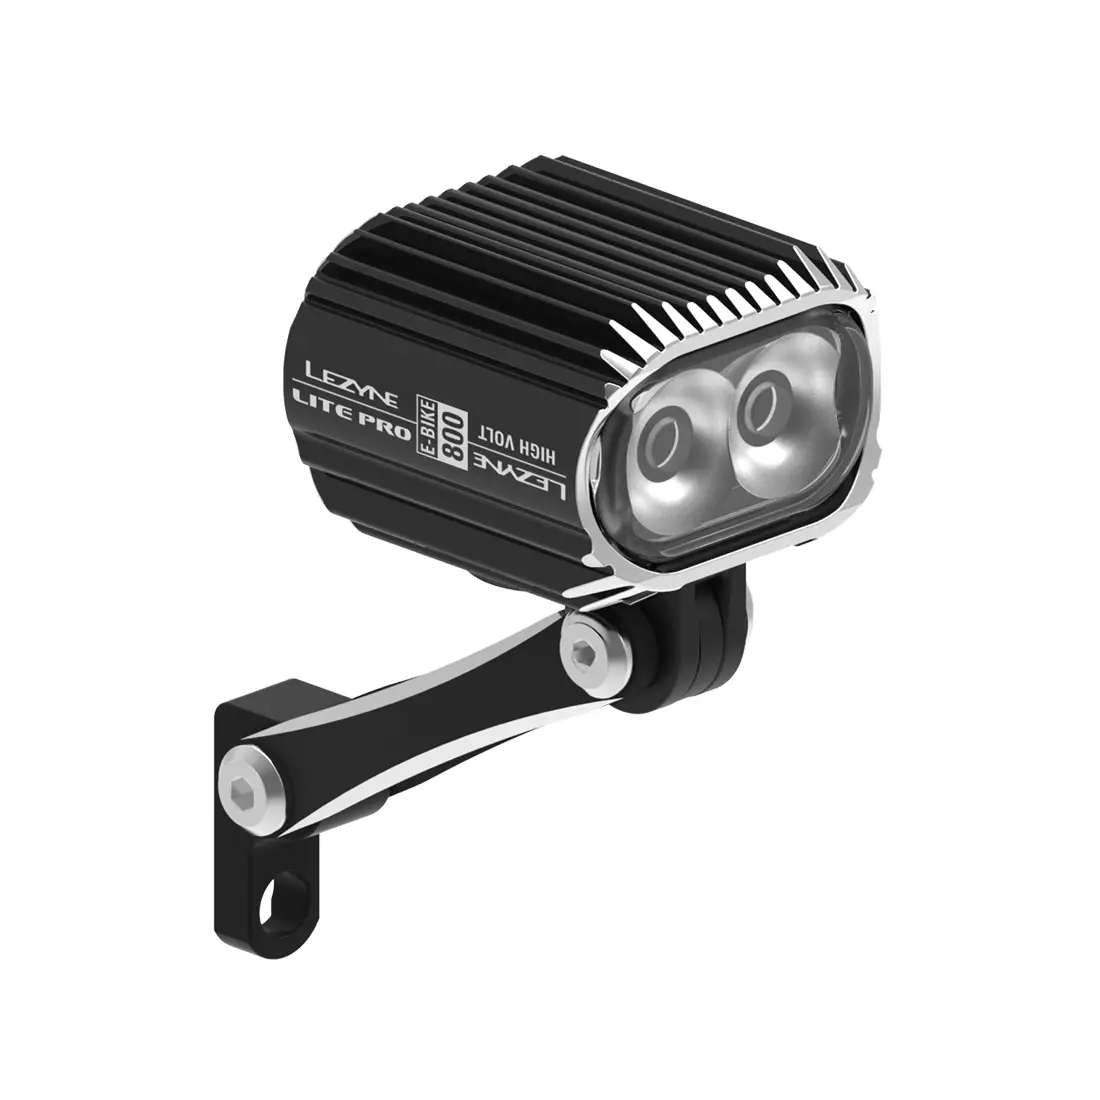 LEZYNE EBIKE LITE PRO DRIVE 800 SWITCH HIGH VOLT Front bicycle lamp, 800 lumens